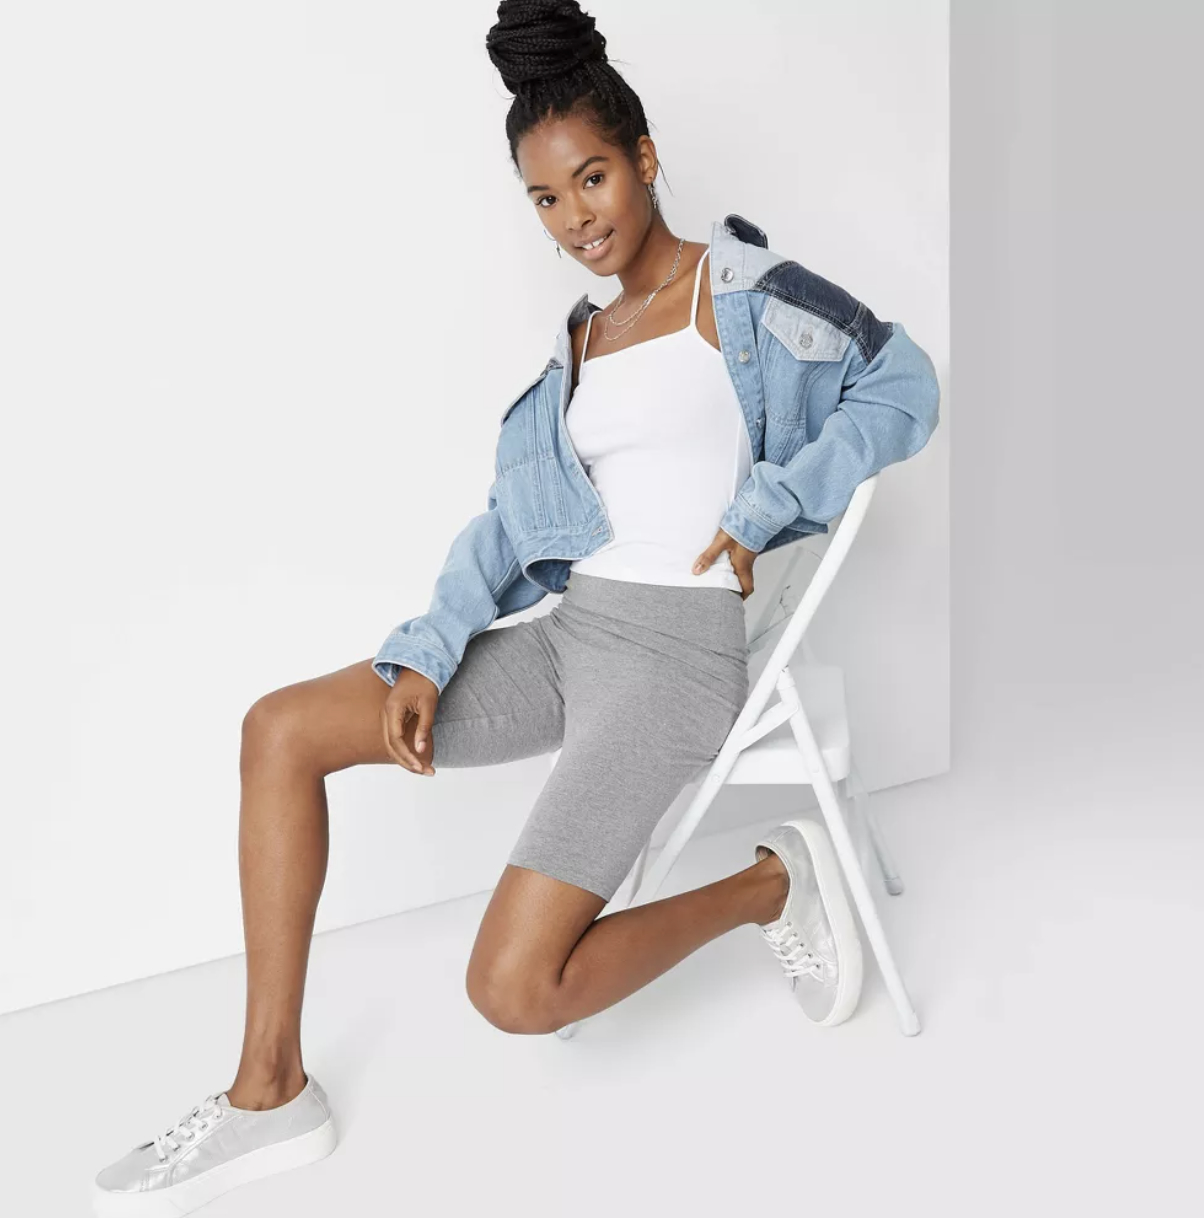 model sitting in a chair wearing a denim jacket, white top, grey skirt, and white sneakers